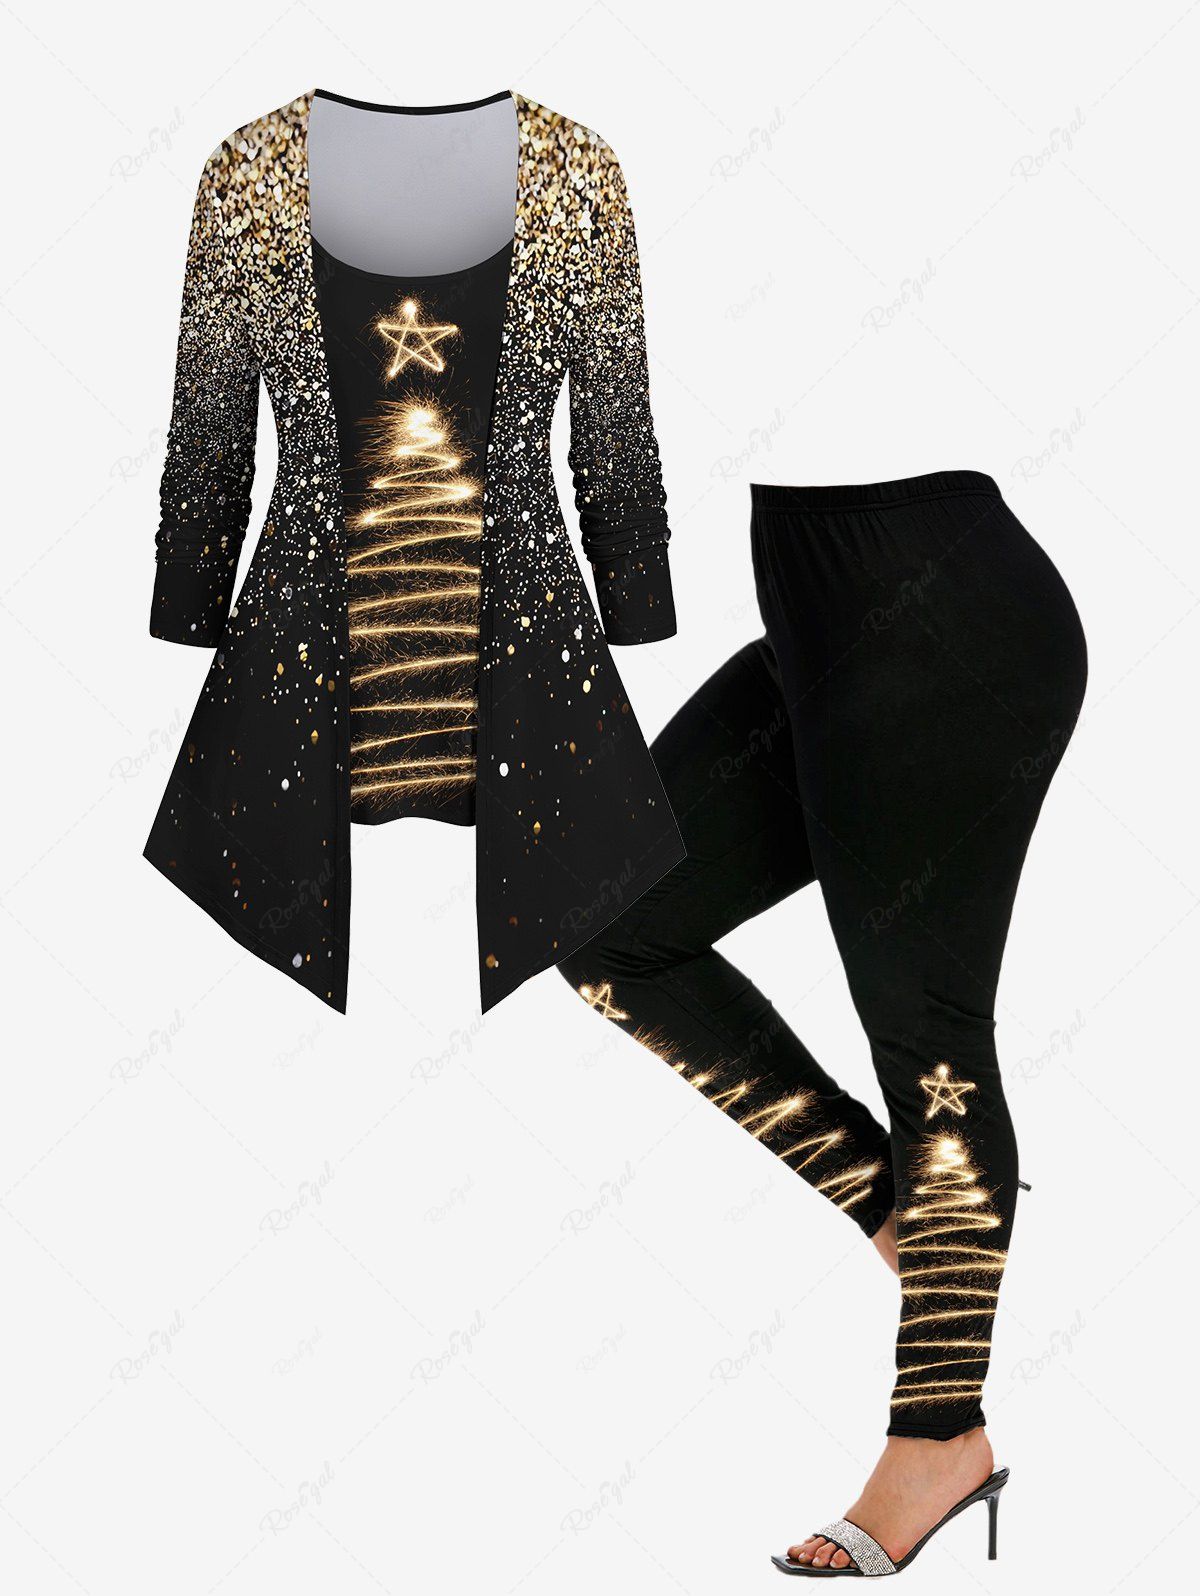 Outfit Plus Size Christmas Star Glitter Sparkling Sequin 3D Printed 2 In 1 Tee and Leggings Outfit  